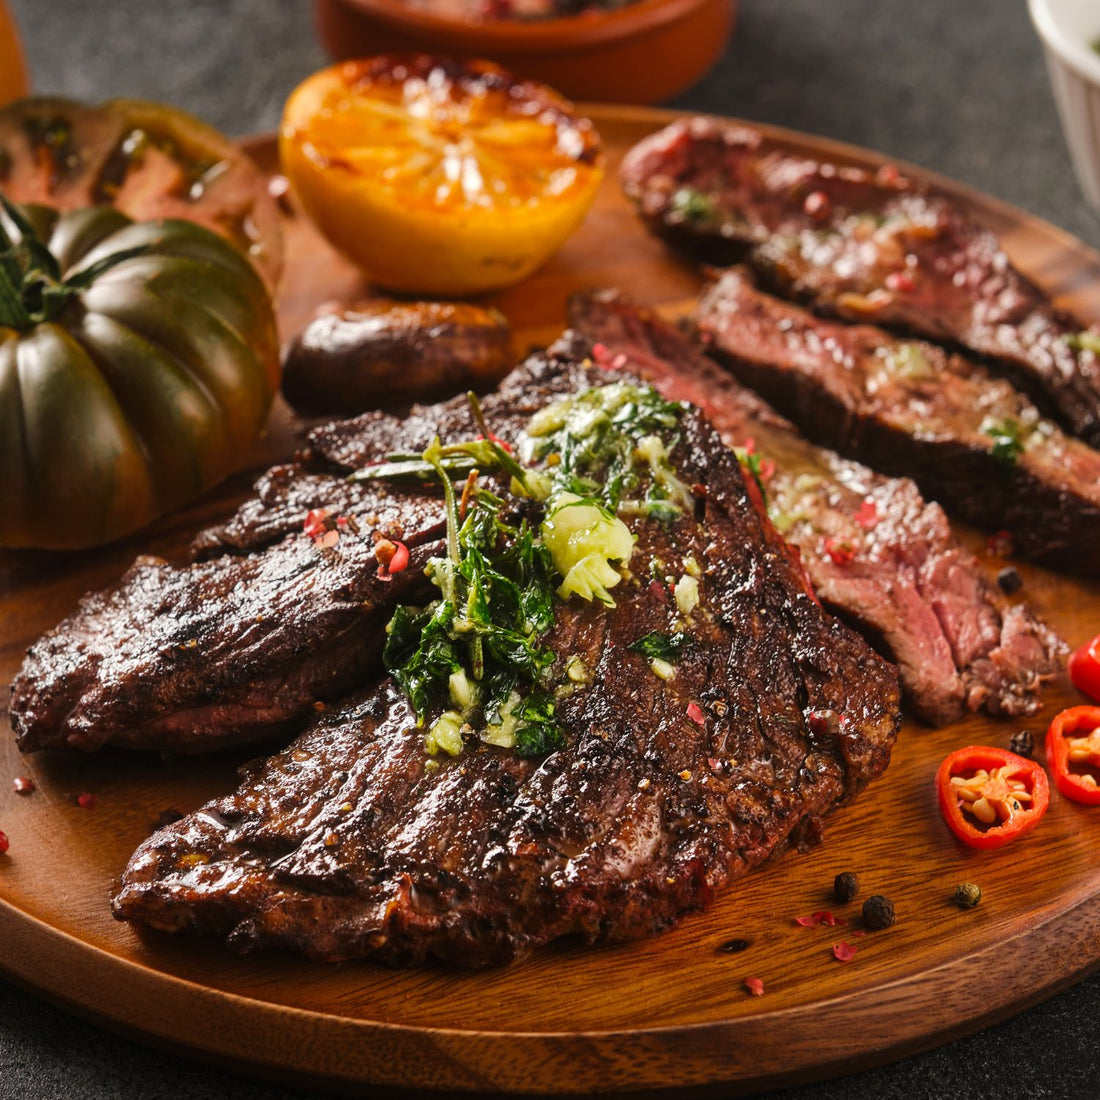 grilled hanger steak on a round wooden cutting board to show what is a hanger steak